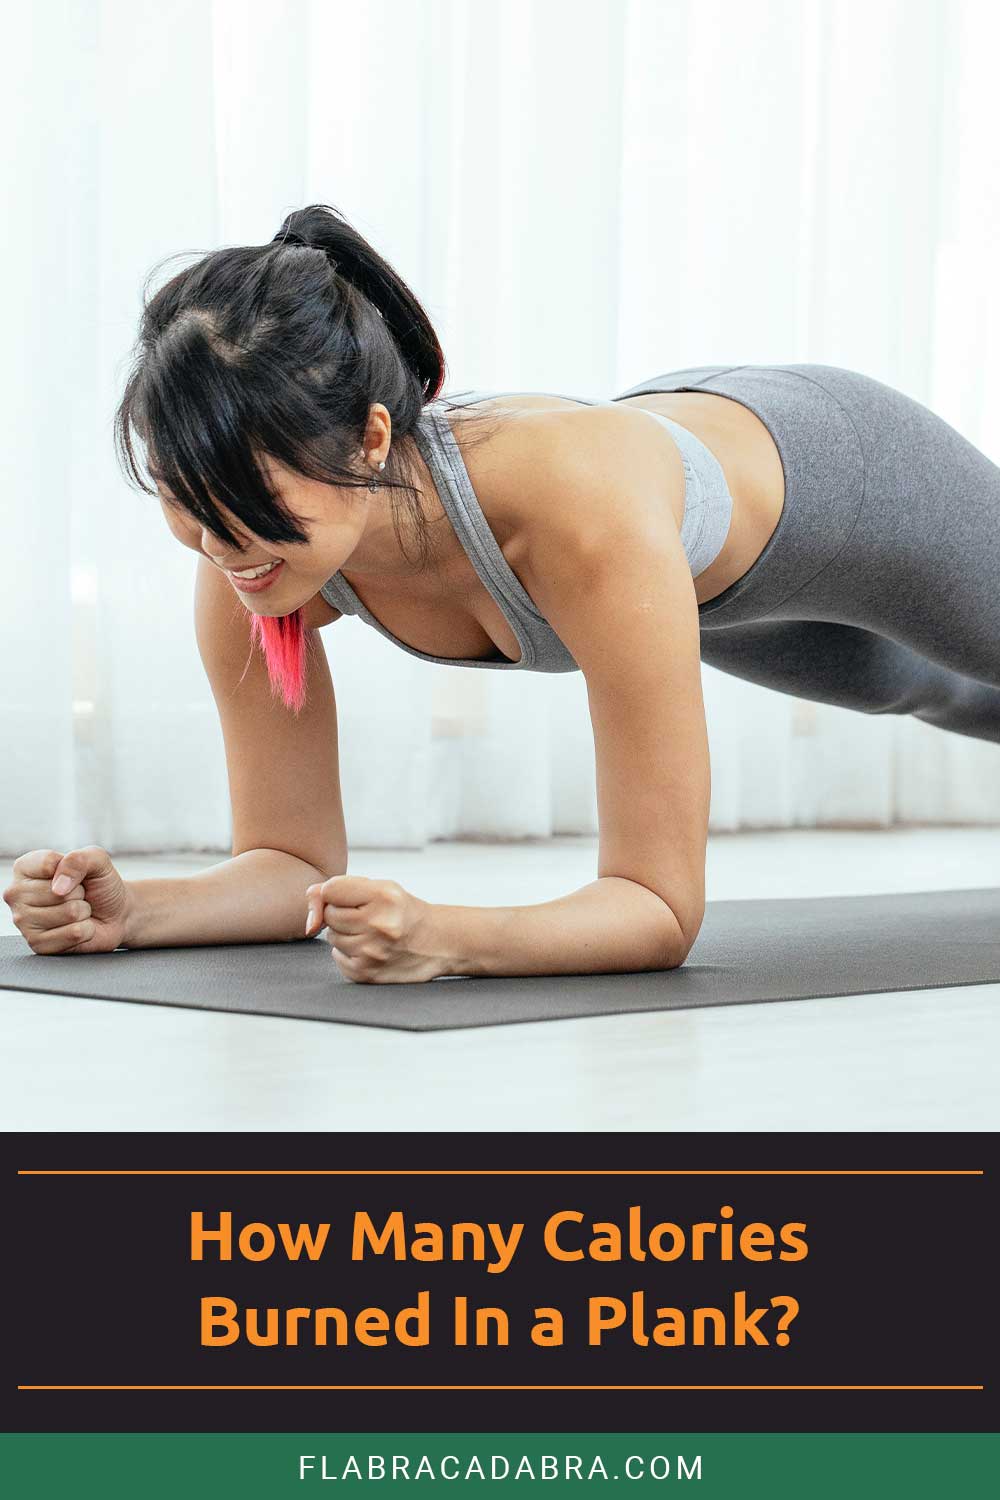 How Many Calories Burned In a Plank?